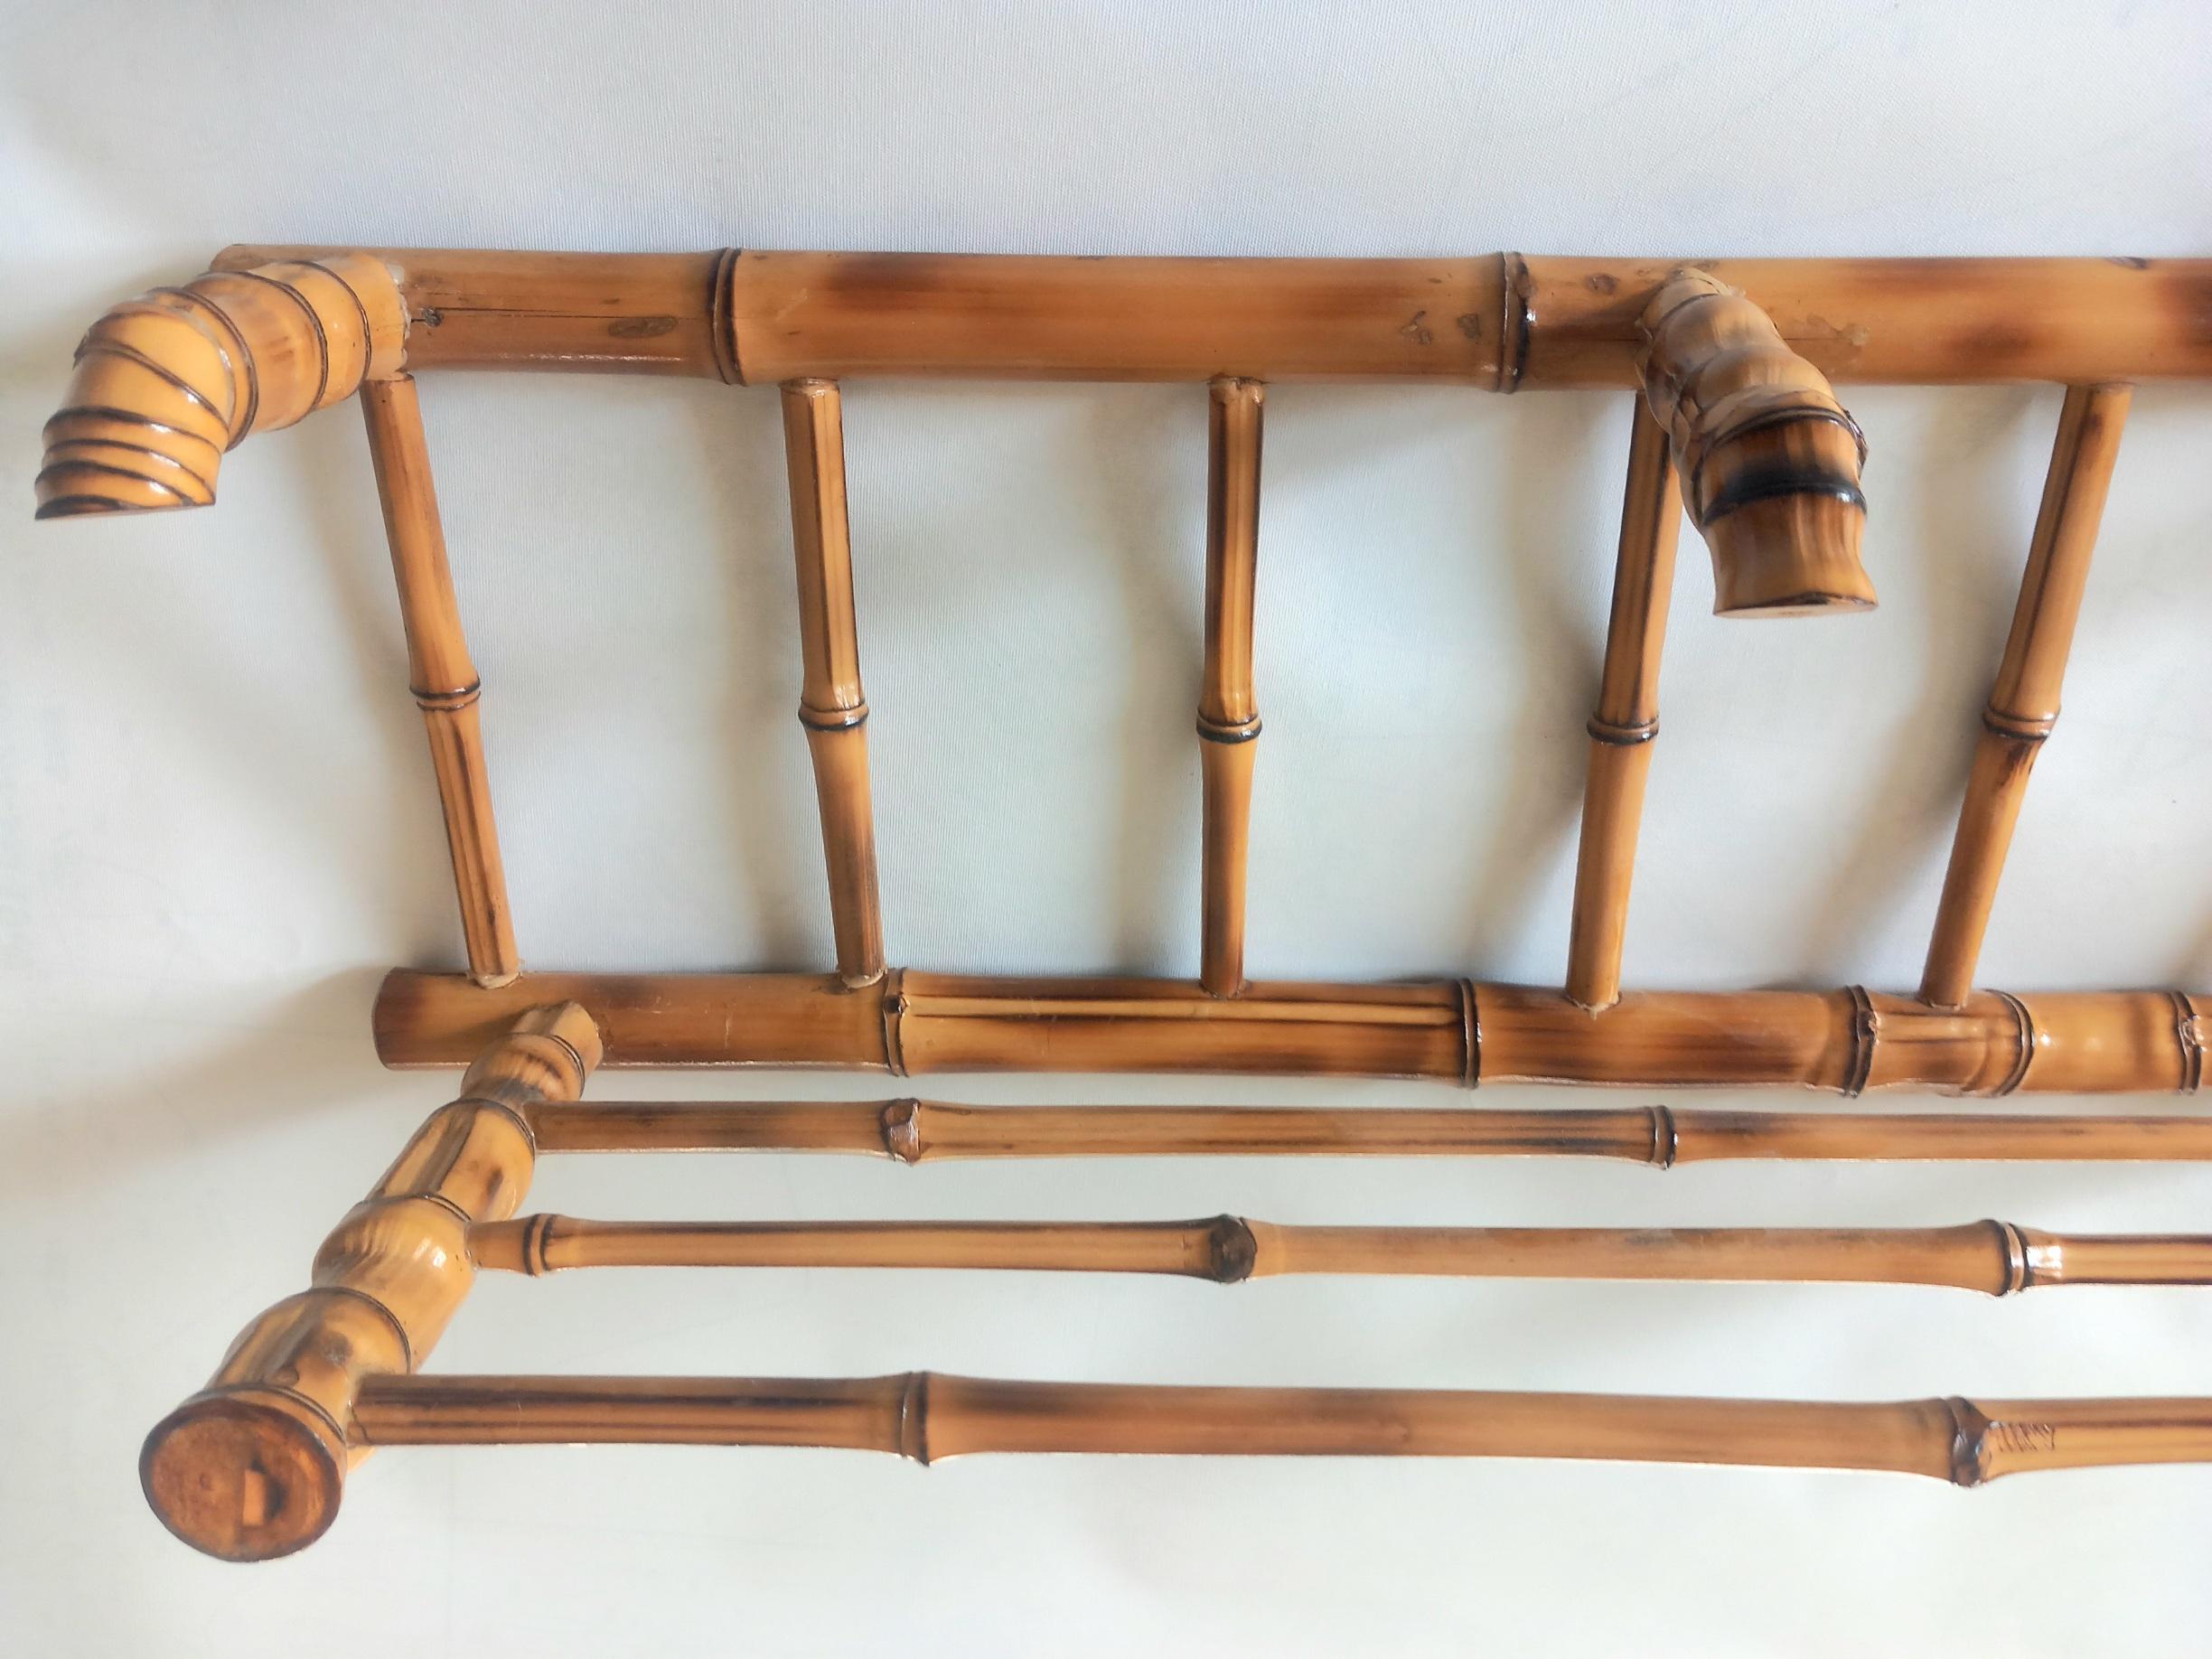 20th Century Beautiful Bamboo Coat Rack Three Hangers Top Shelf for Hats or Bags, Spain For Sale